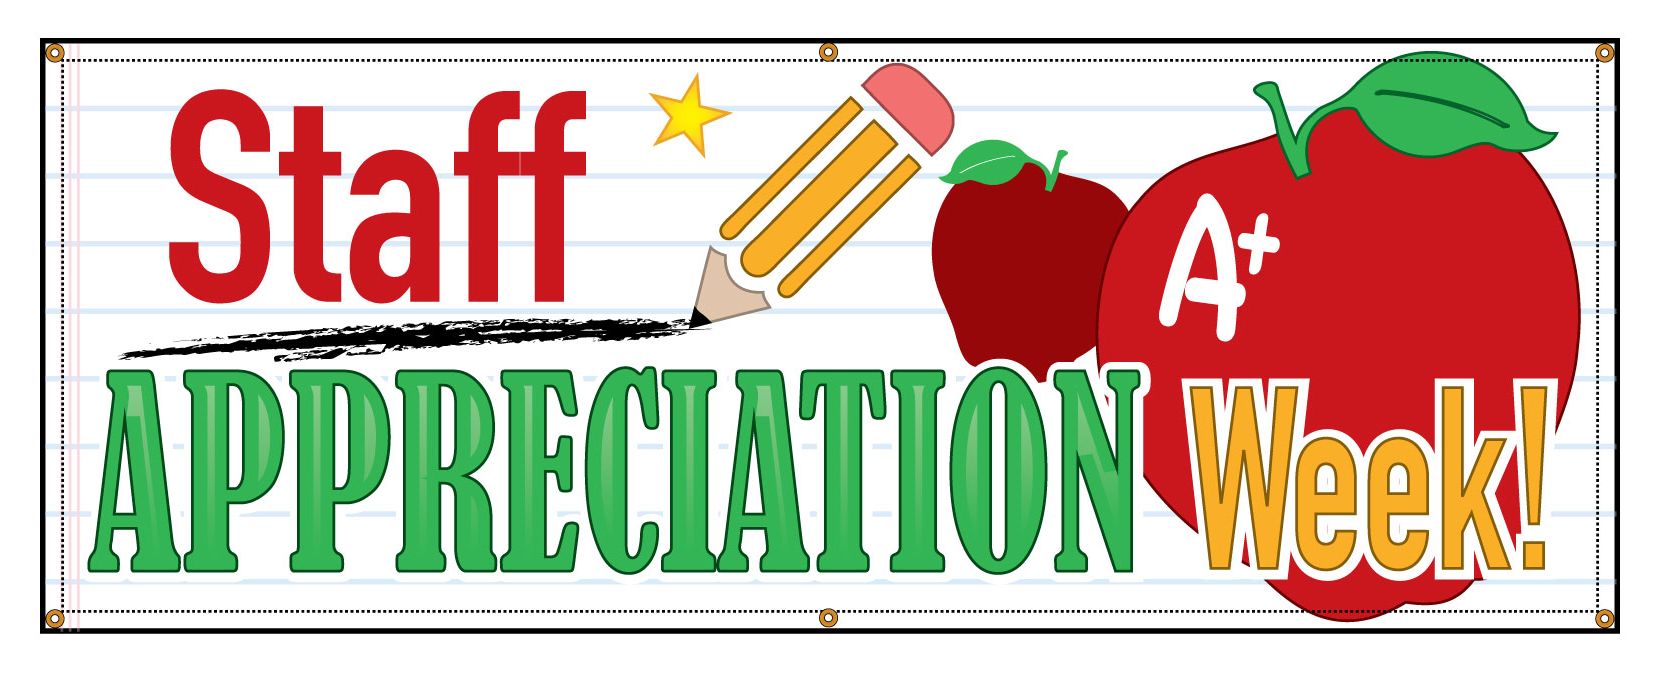 Buy our "Staff Appreciation Week" banner from Signs World Wide